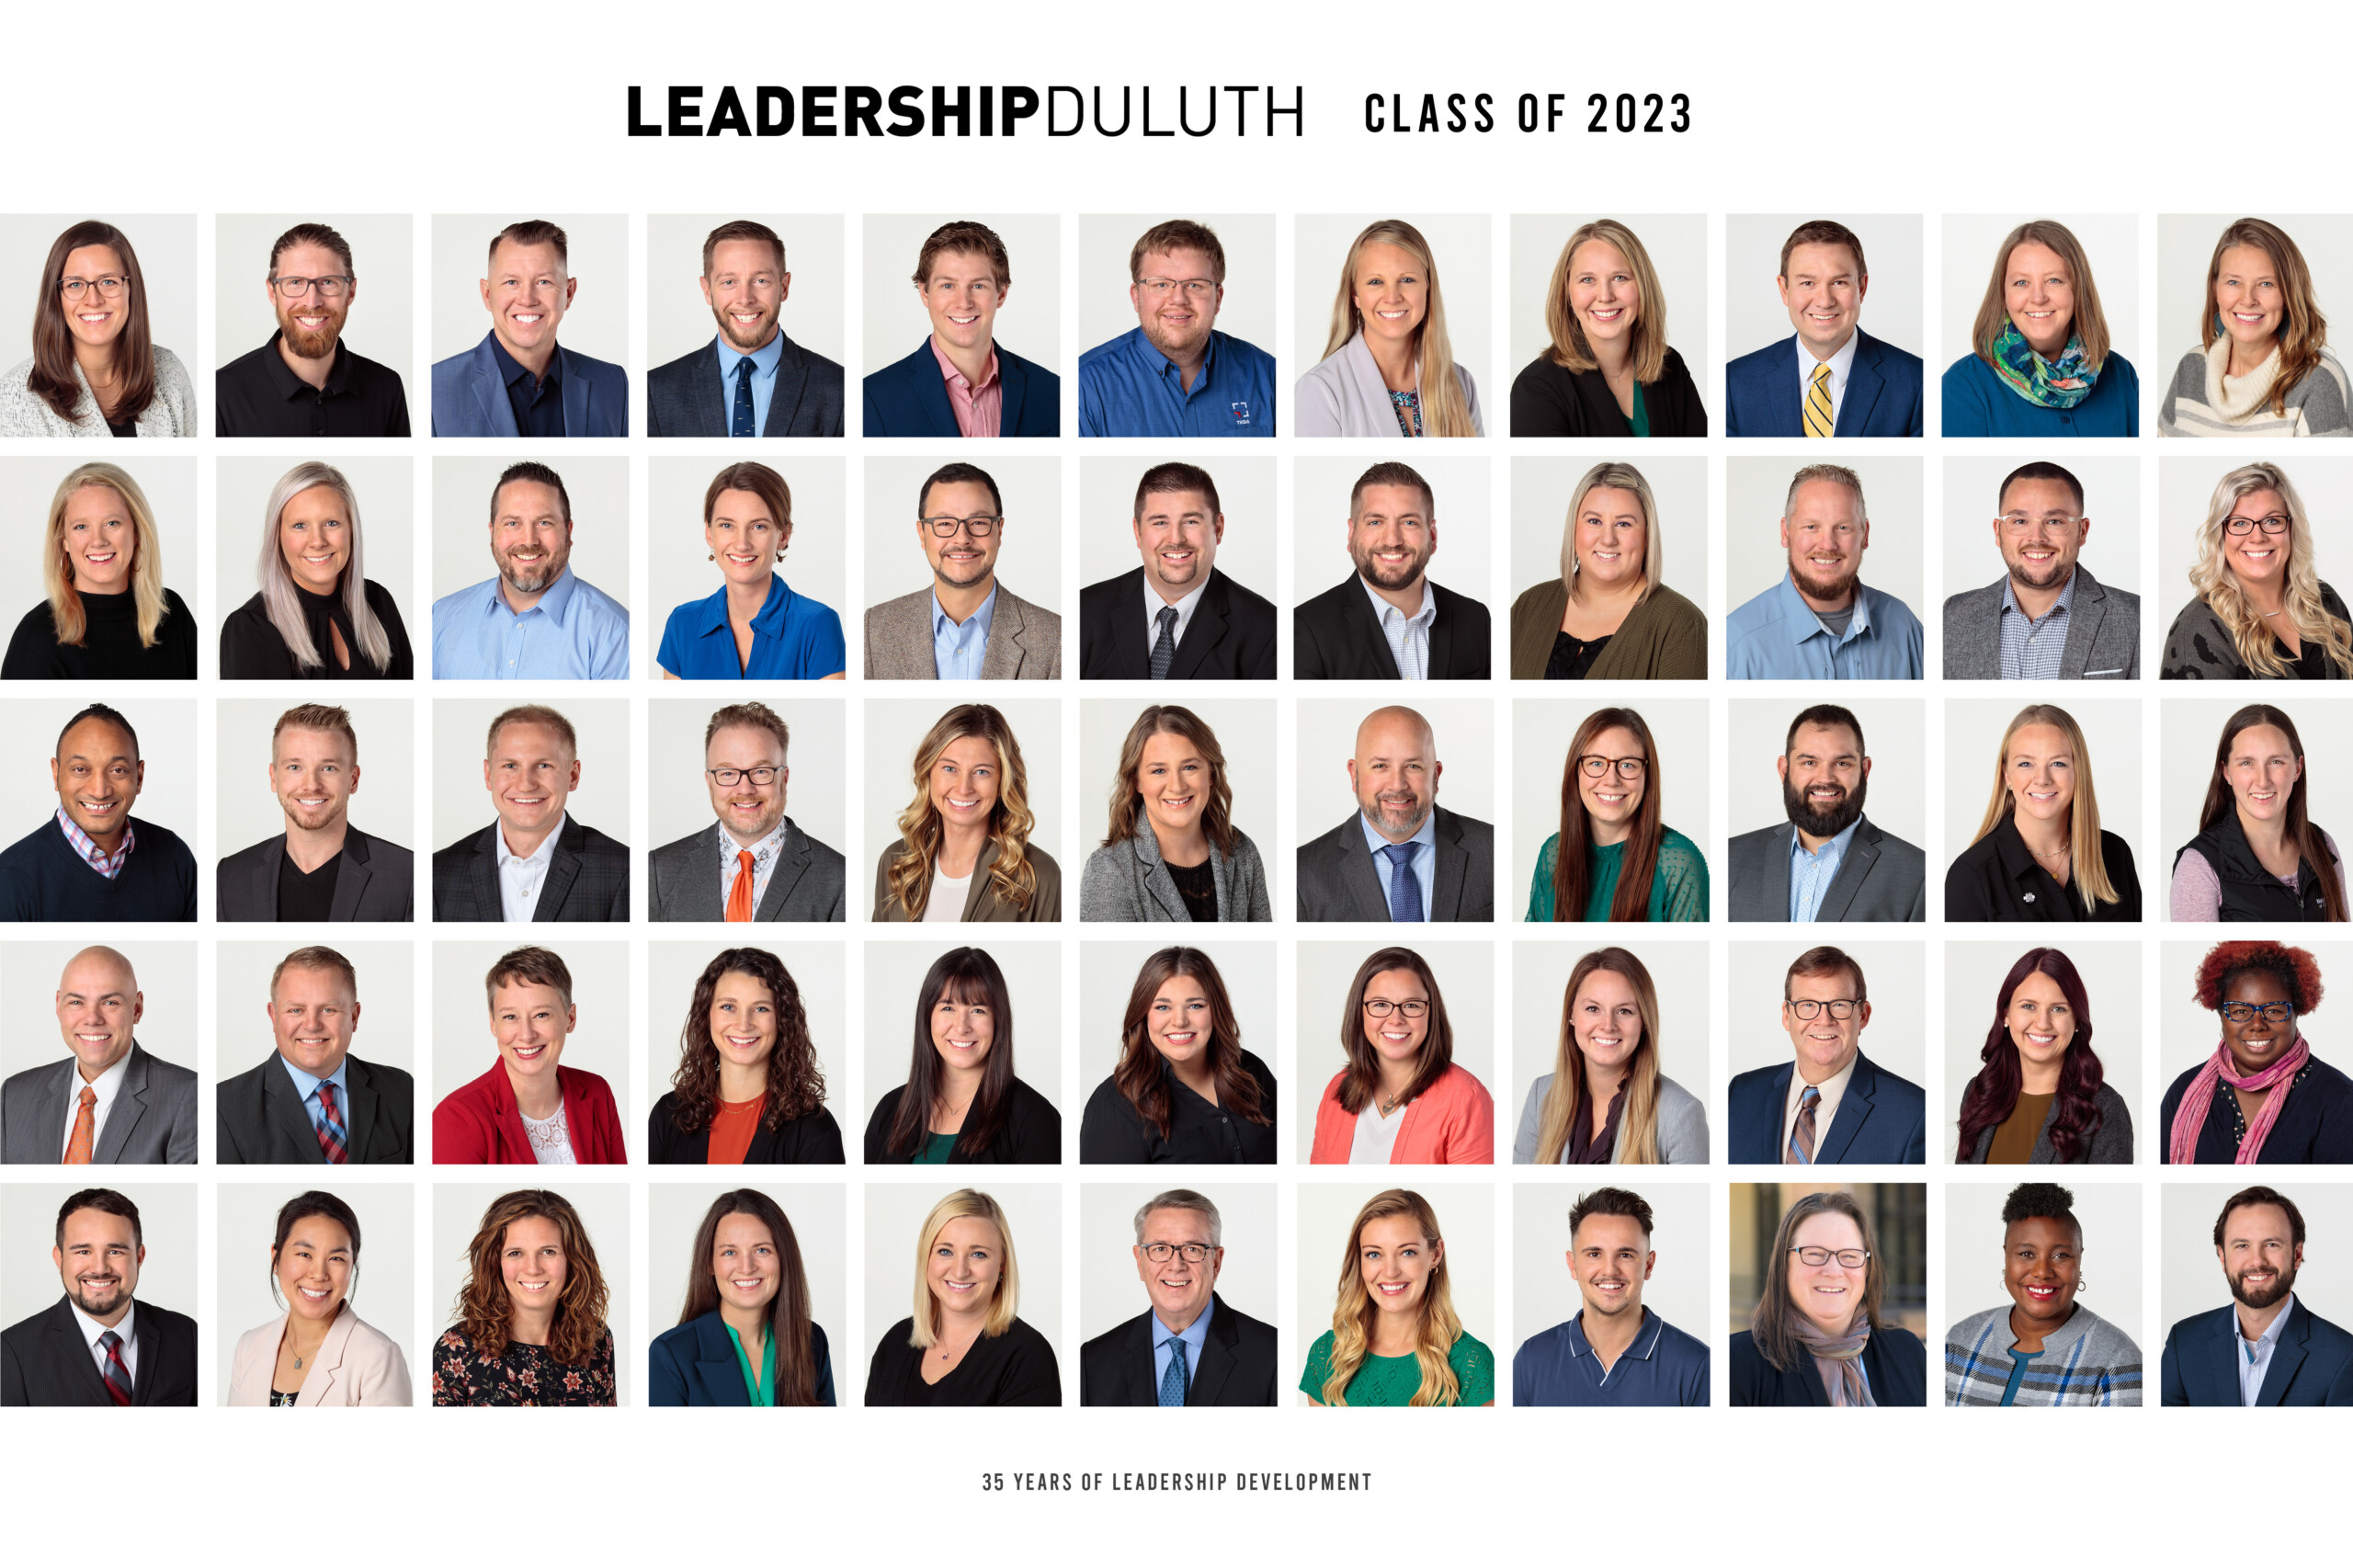 Leadership Duluth class of 2023